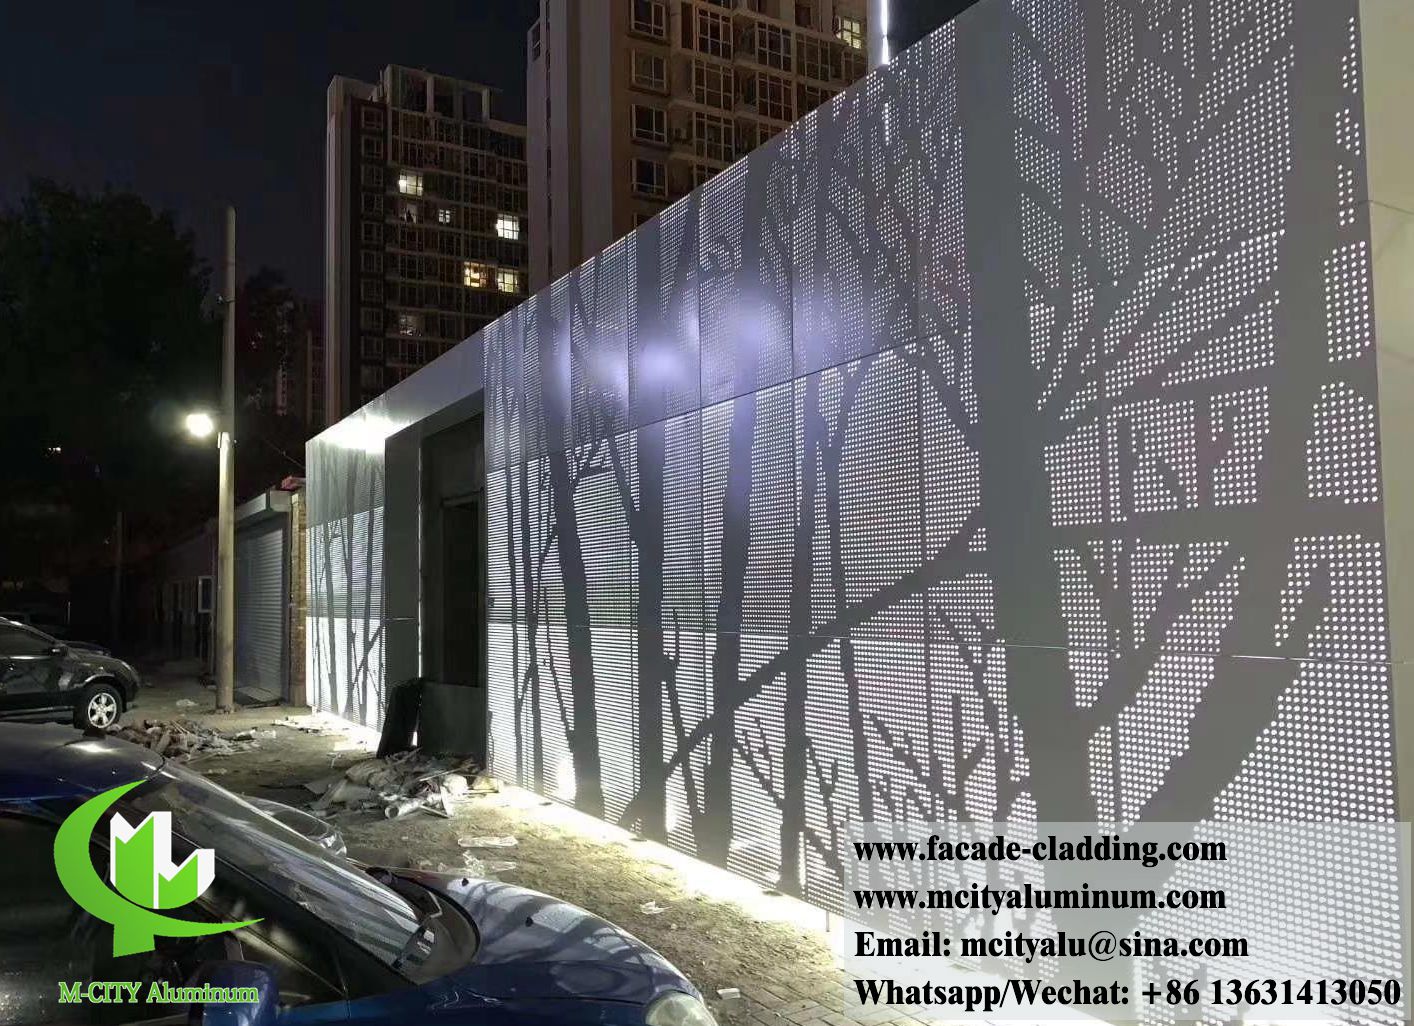 Foshan, China CNC Perforating tree design metal wall cladding with LED light inside